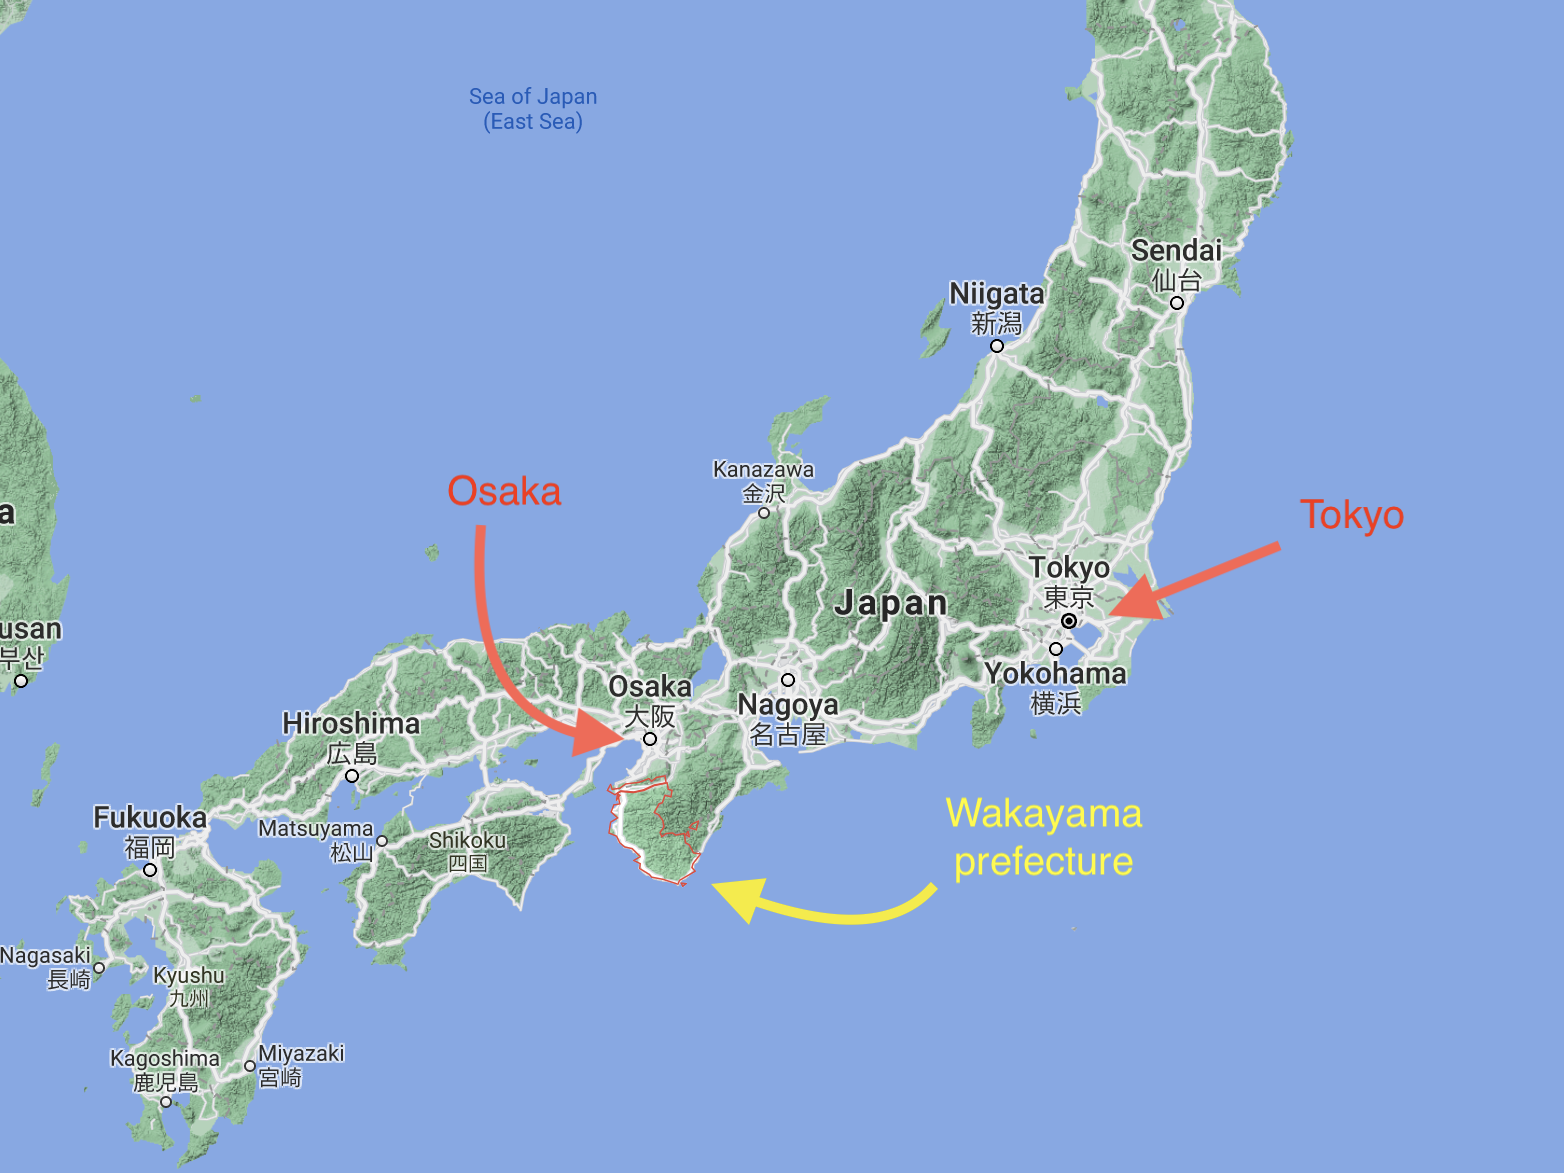 Map of Japan showing that Wakayama prefecture is south of Tokyo and that the closest big city is Osaka